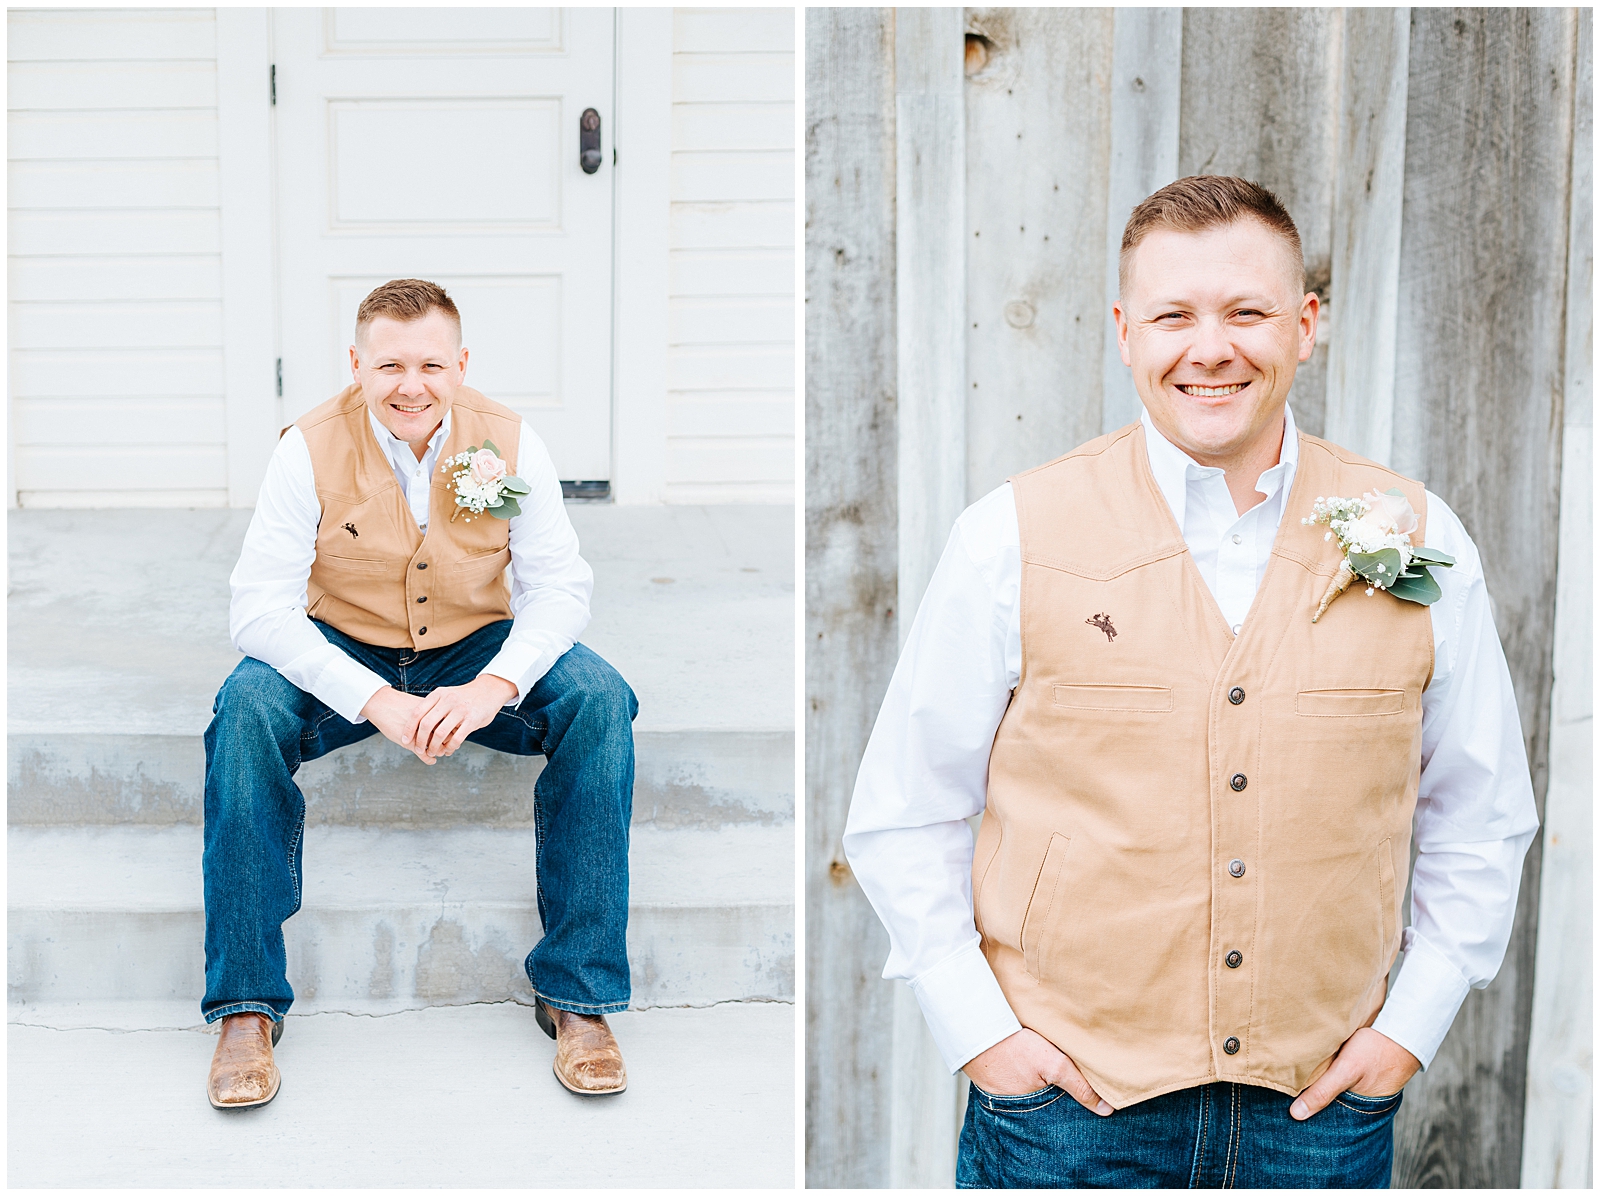 Groom Portraits on the wedding day at Rustic Chic Still Water Hollow Wedding